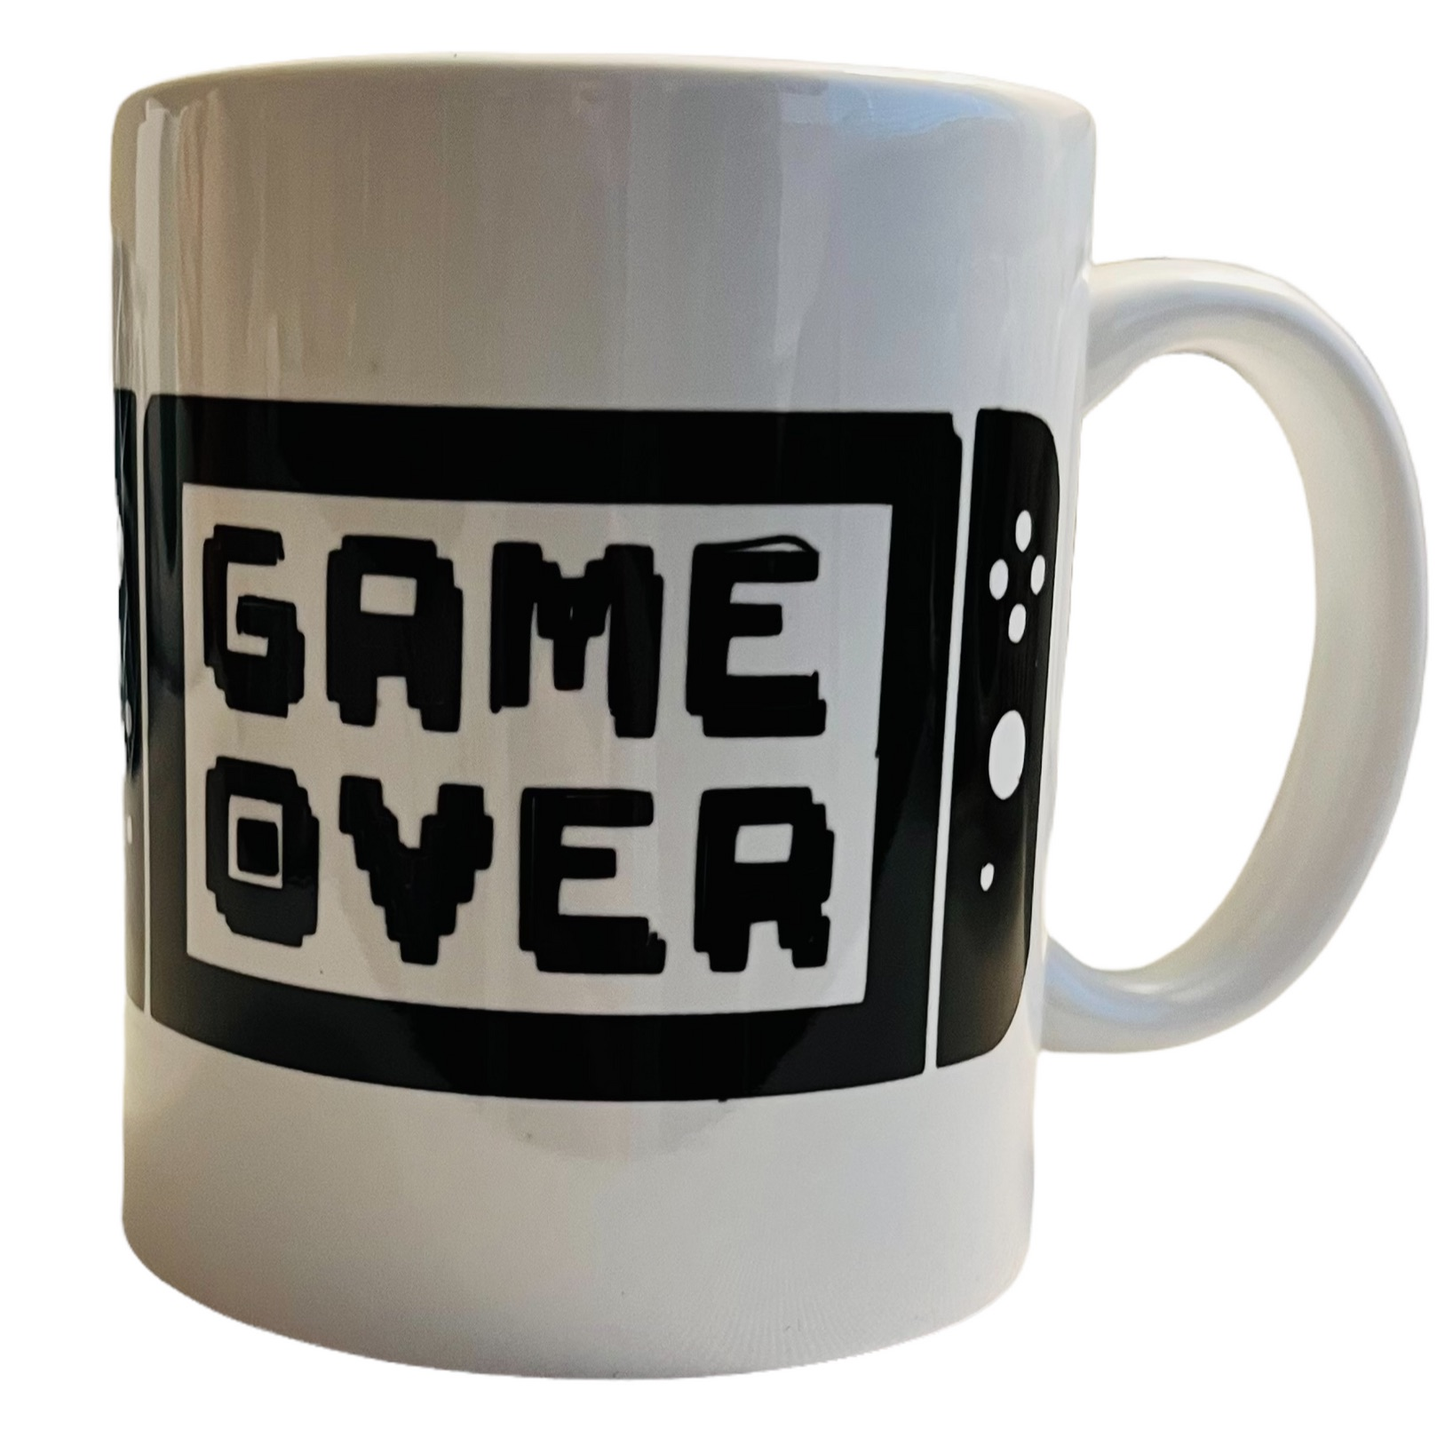 JenDore " I Can't Sorry I Have Plans Game Over " Gaming Headset Switch 12 oz. Coffee Team Mug